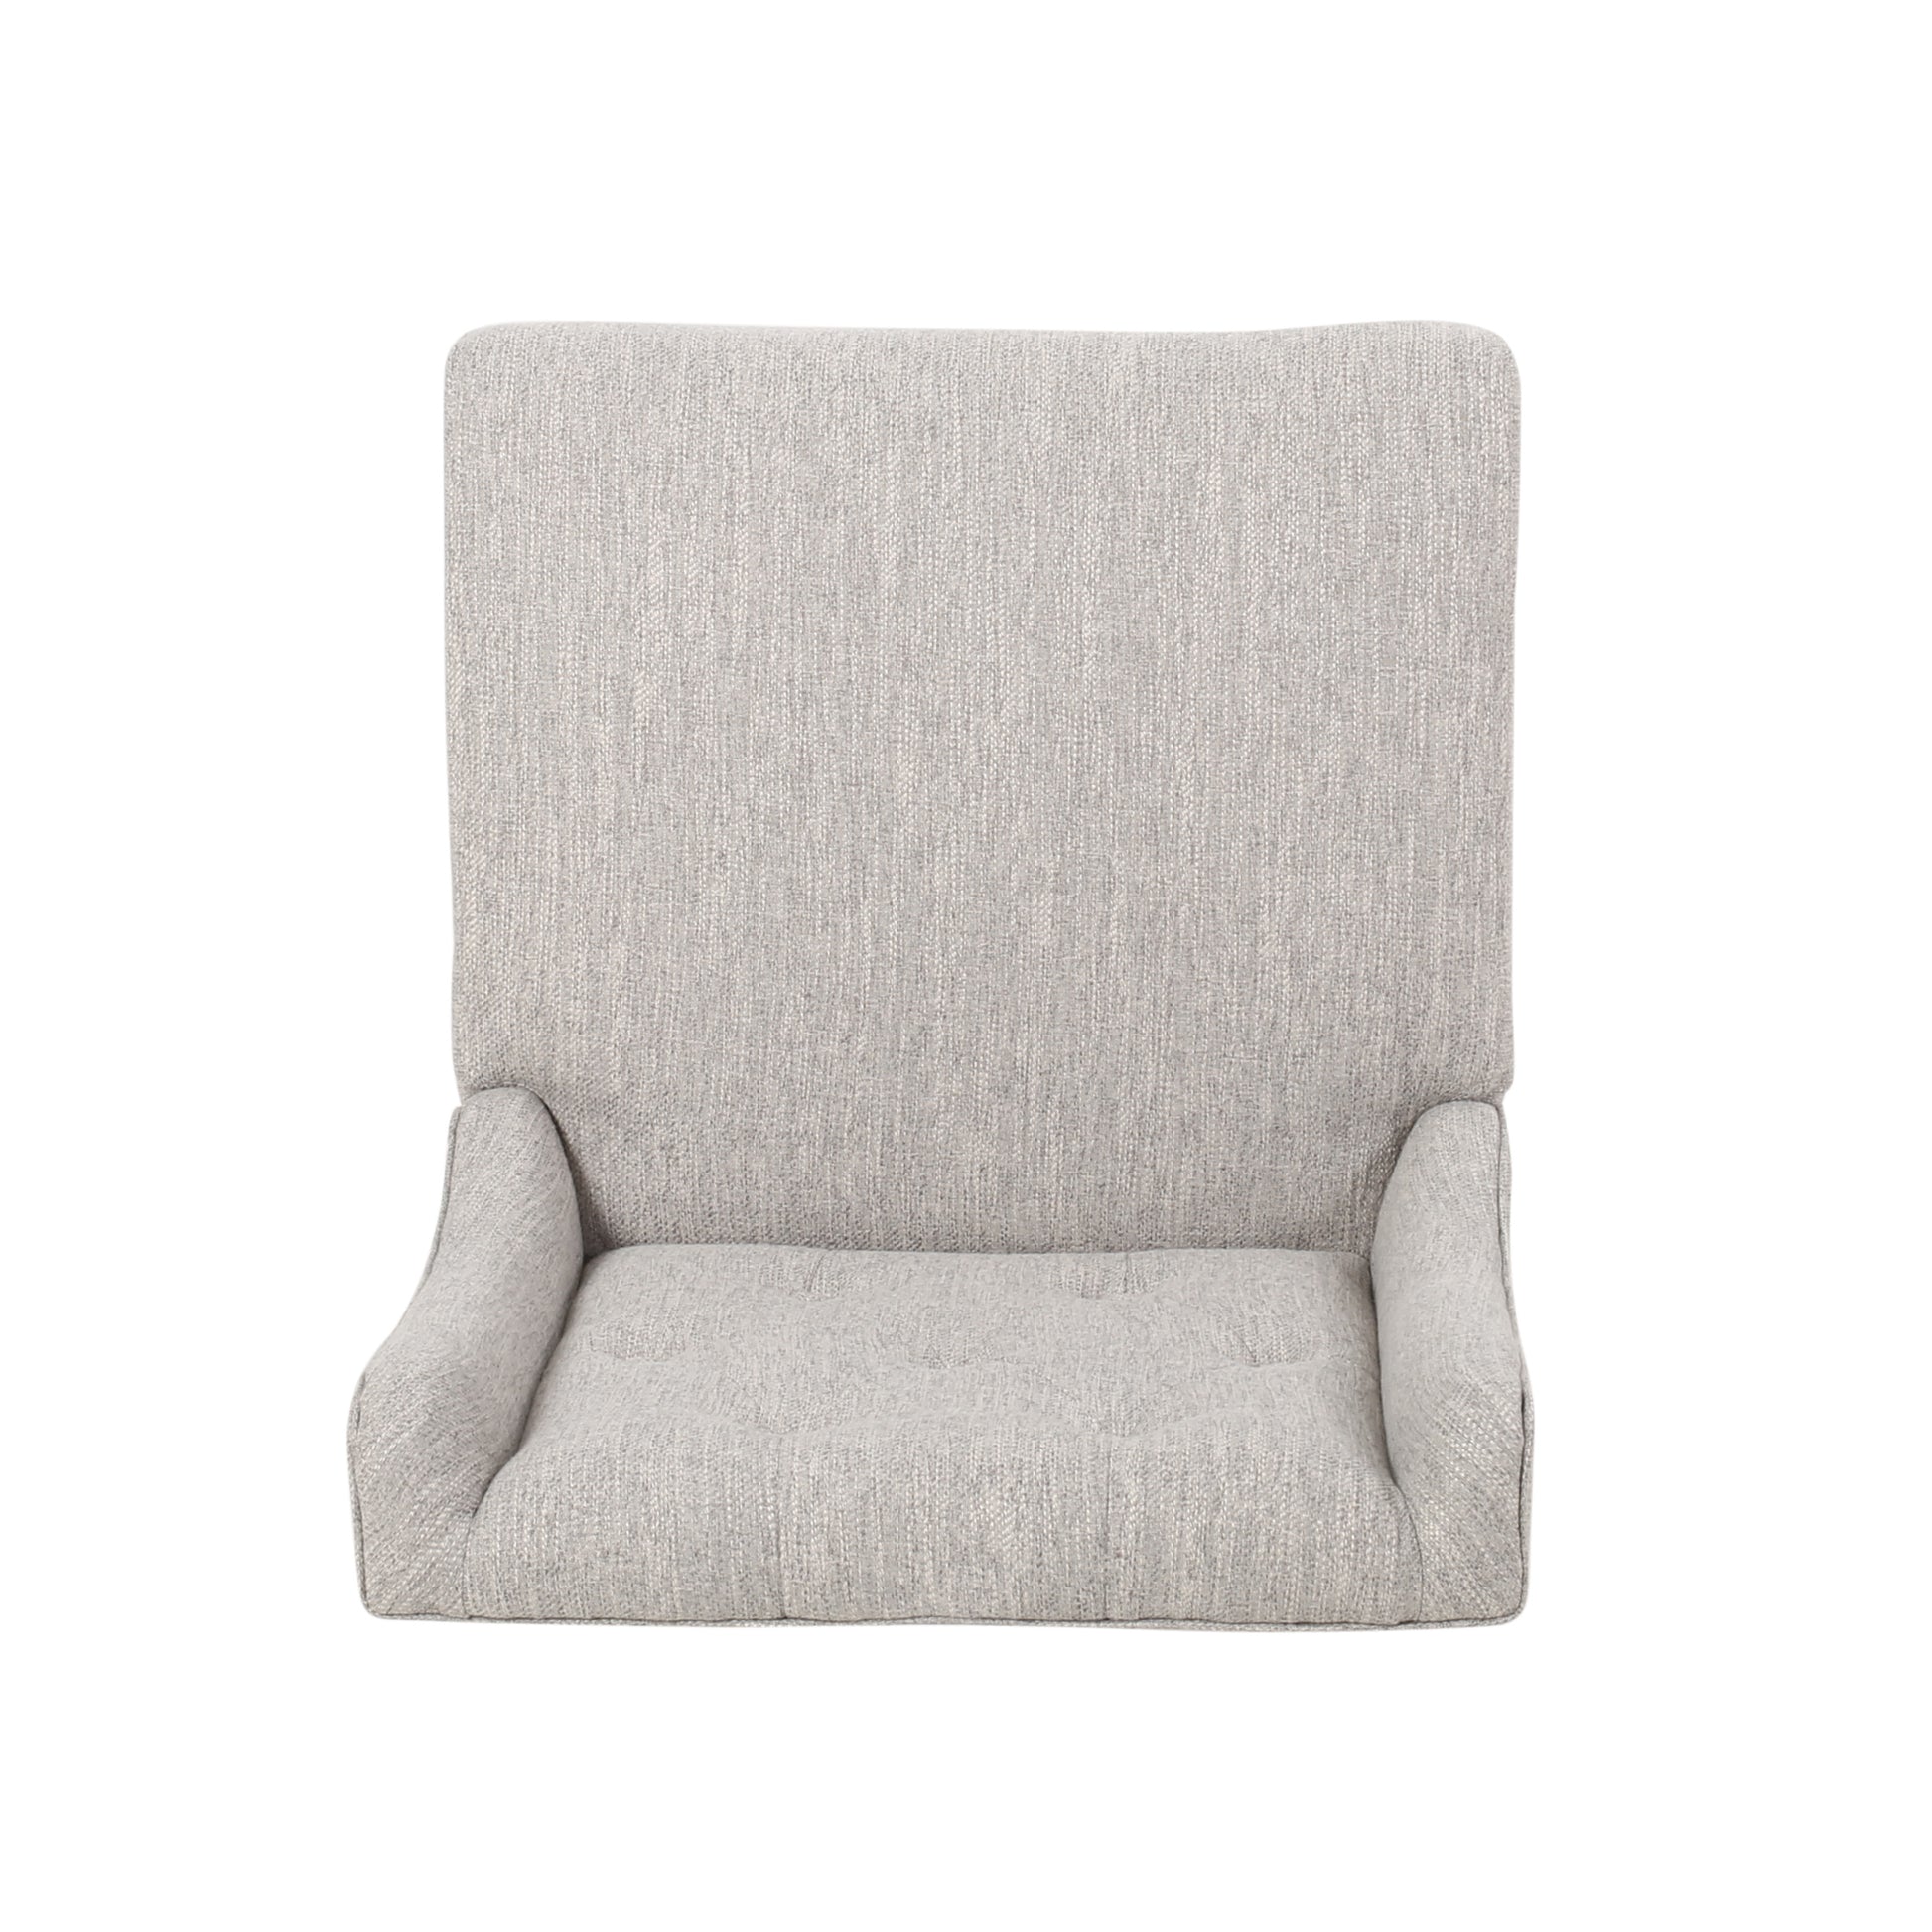 Vienna Contemporary Fabric Tufted Wingback 27 Inch light grey+natural-fabric